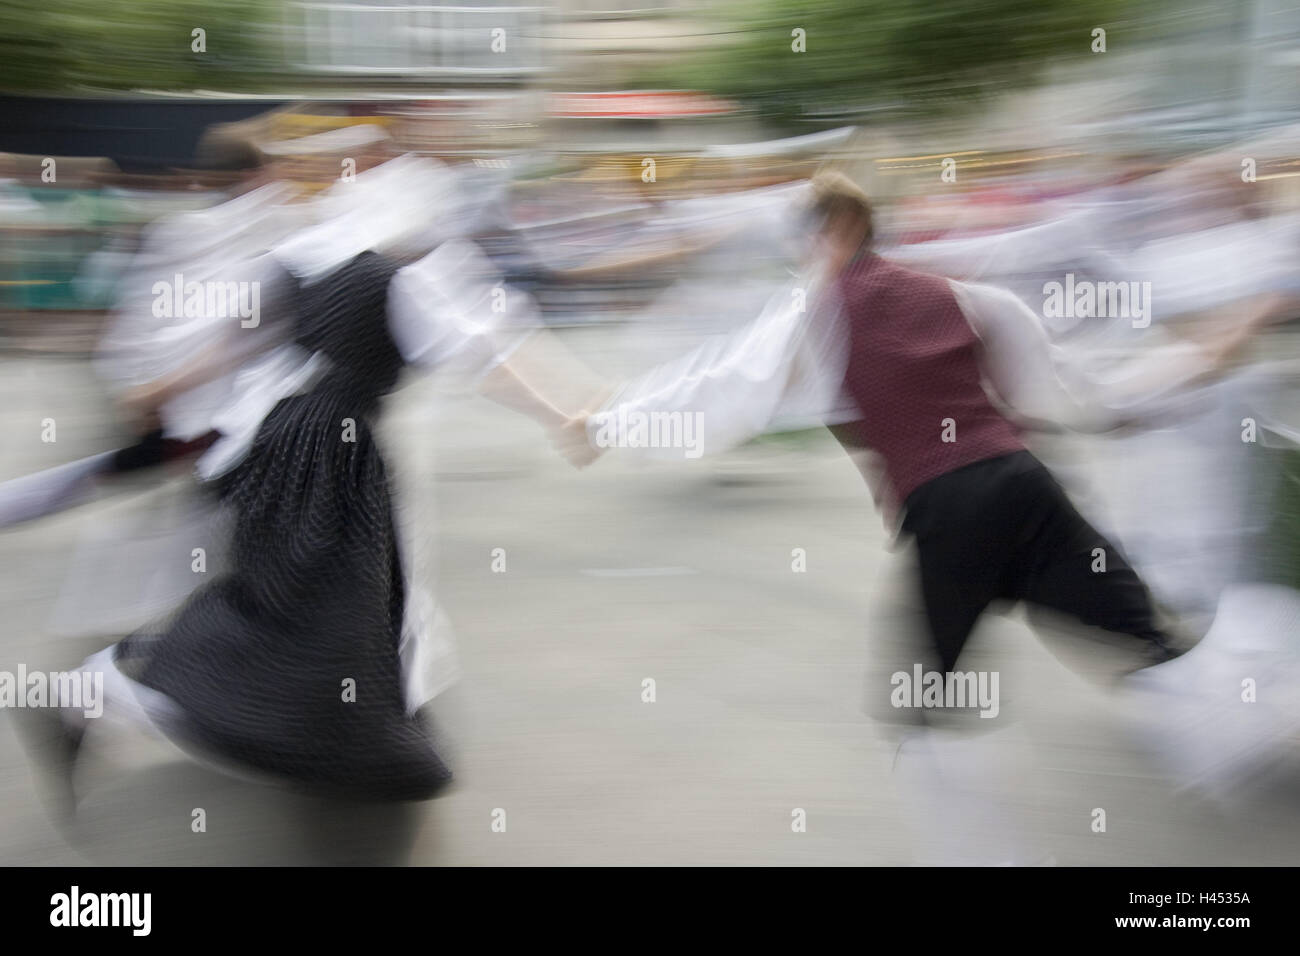 Germany, Hannover, shopping street, dance group, national costume dance, zoomed, town, dance feast, feast, dance, folk dance, dance couple, couple, back view, person, group, folk dance, national costume, dance, folklore, motion, zoom recording, zoom effect, motion blur, Stock Photo